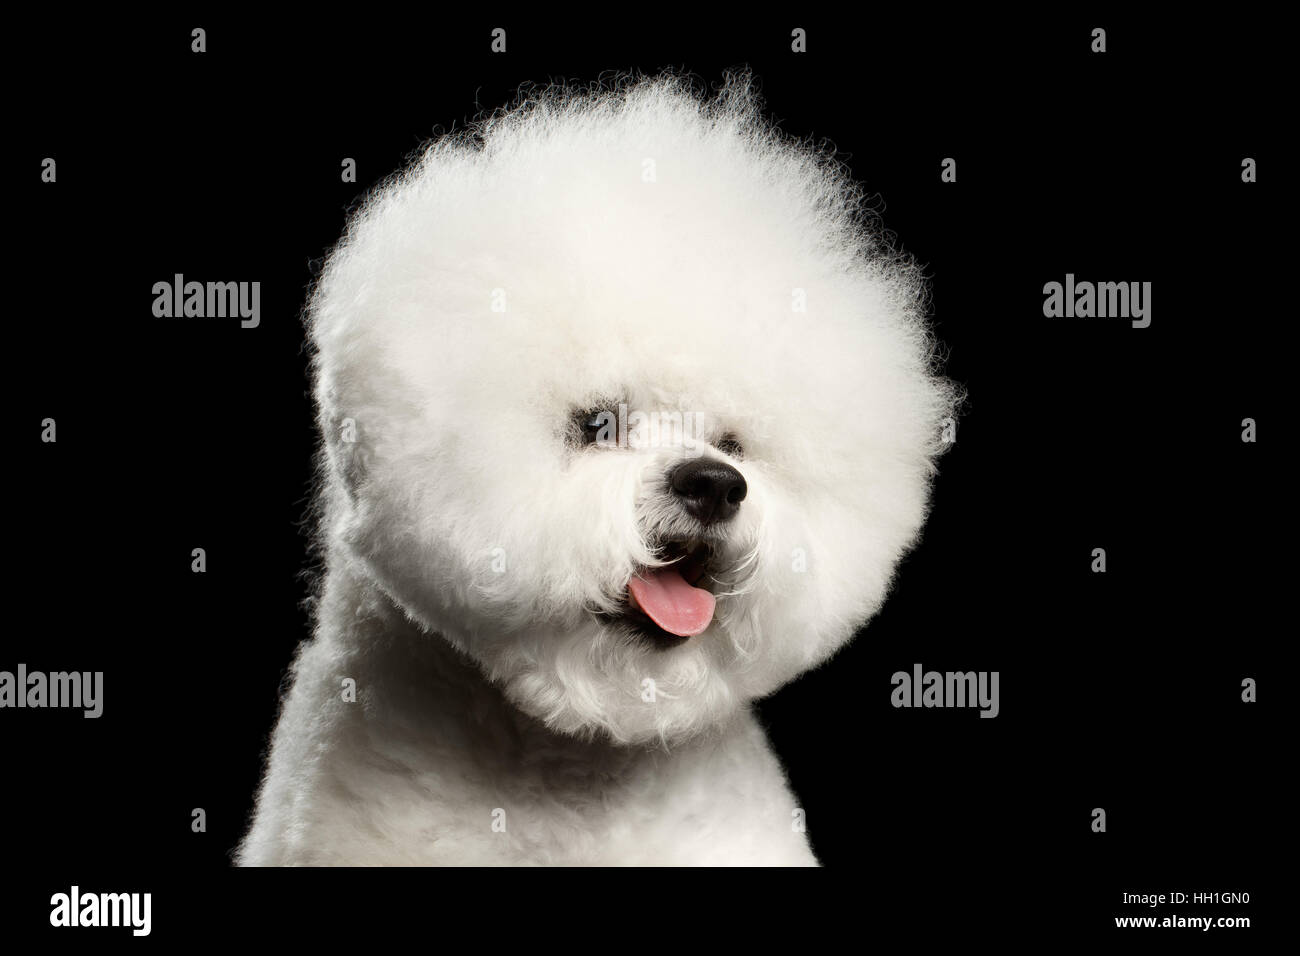 Close-up portrait of white bichon frise dog with groomed fur like ball head isolated on black background, front view Stock Photo